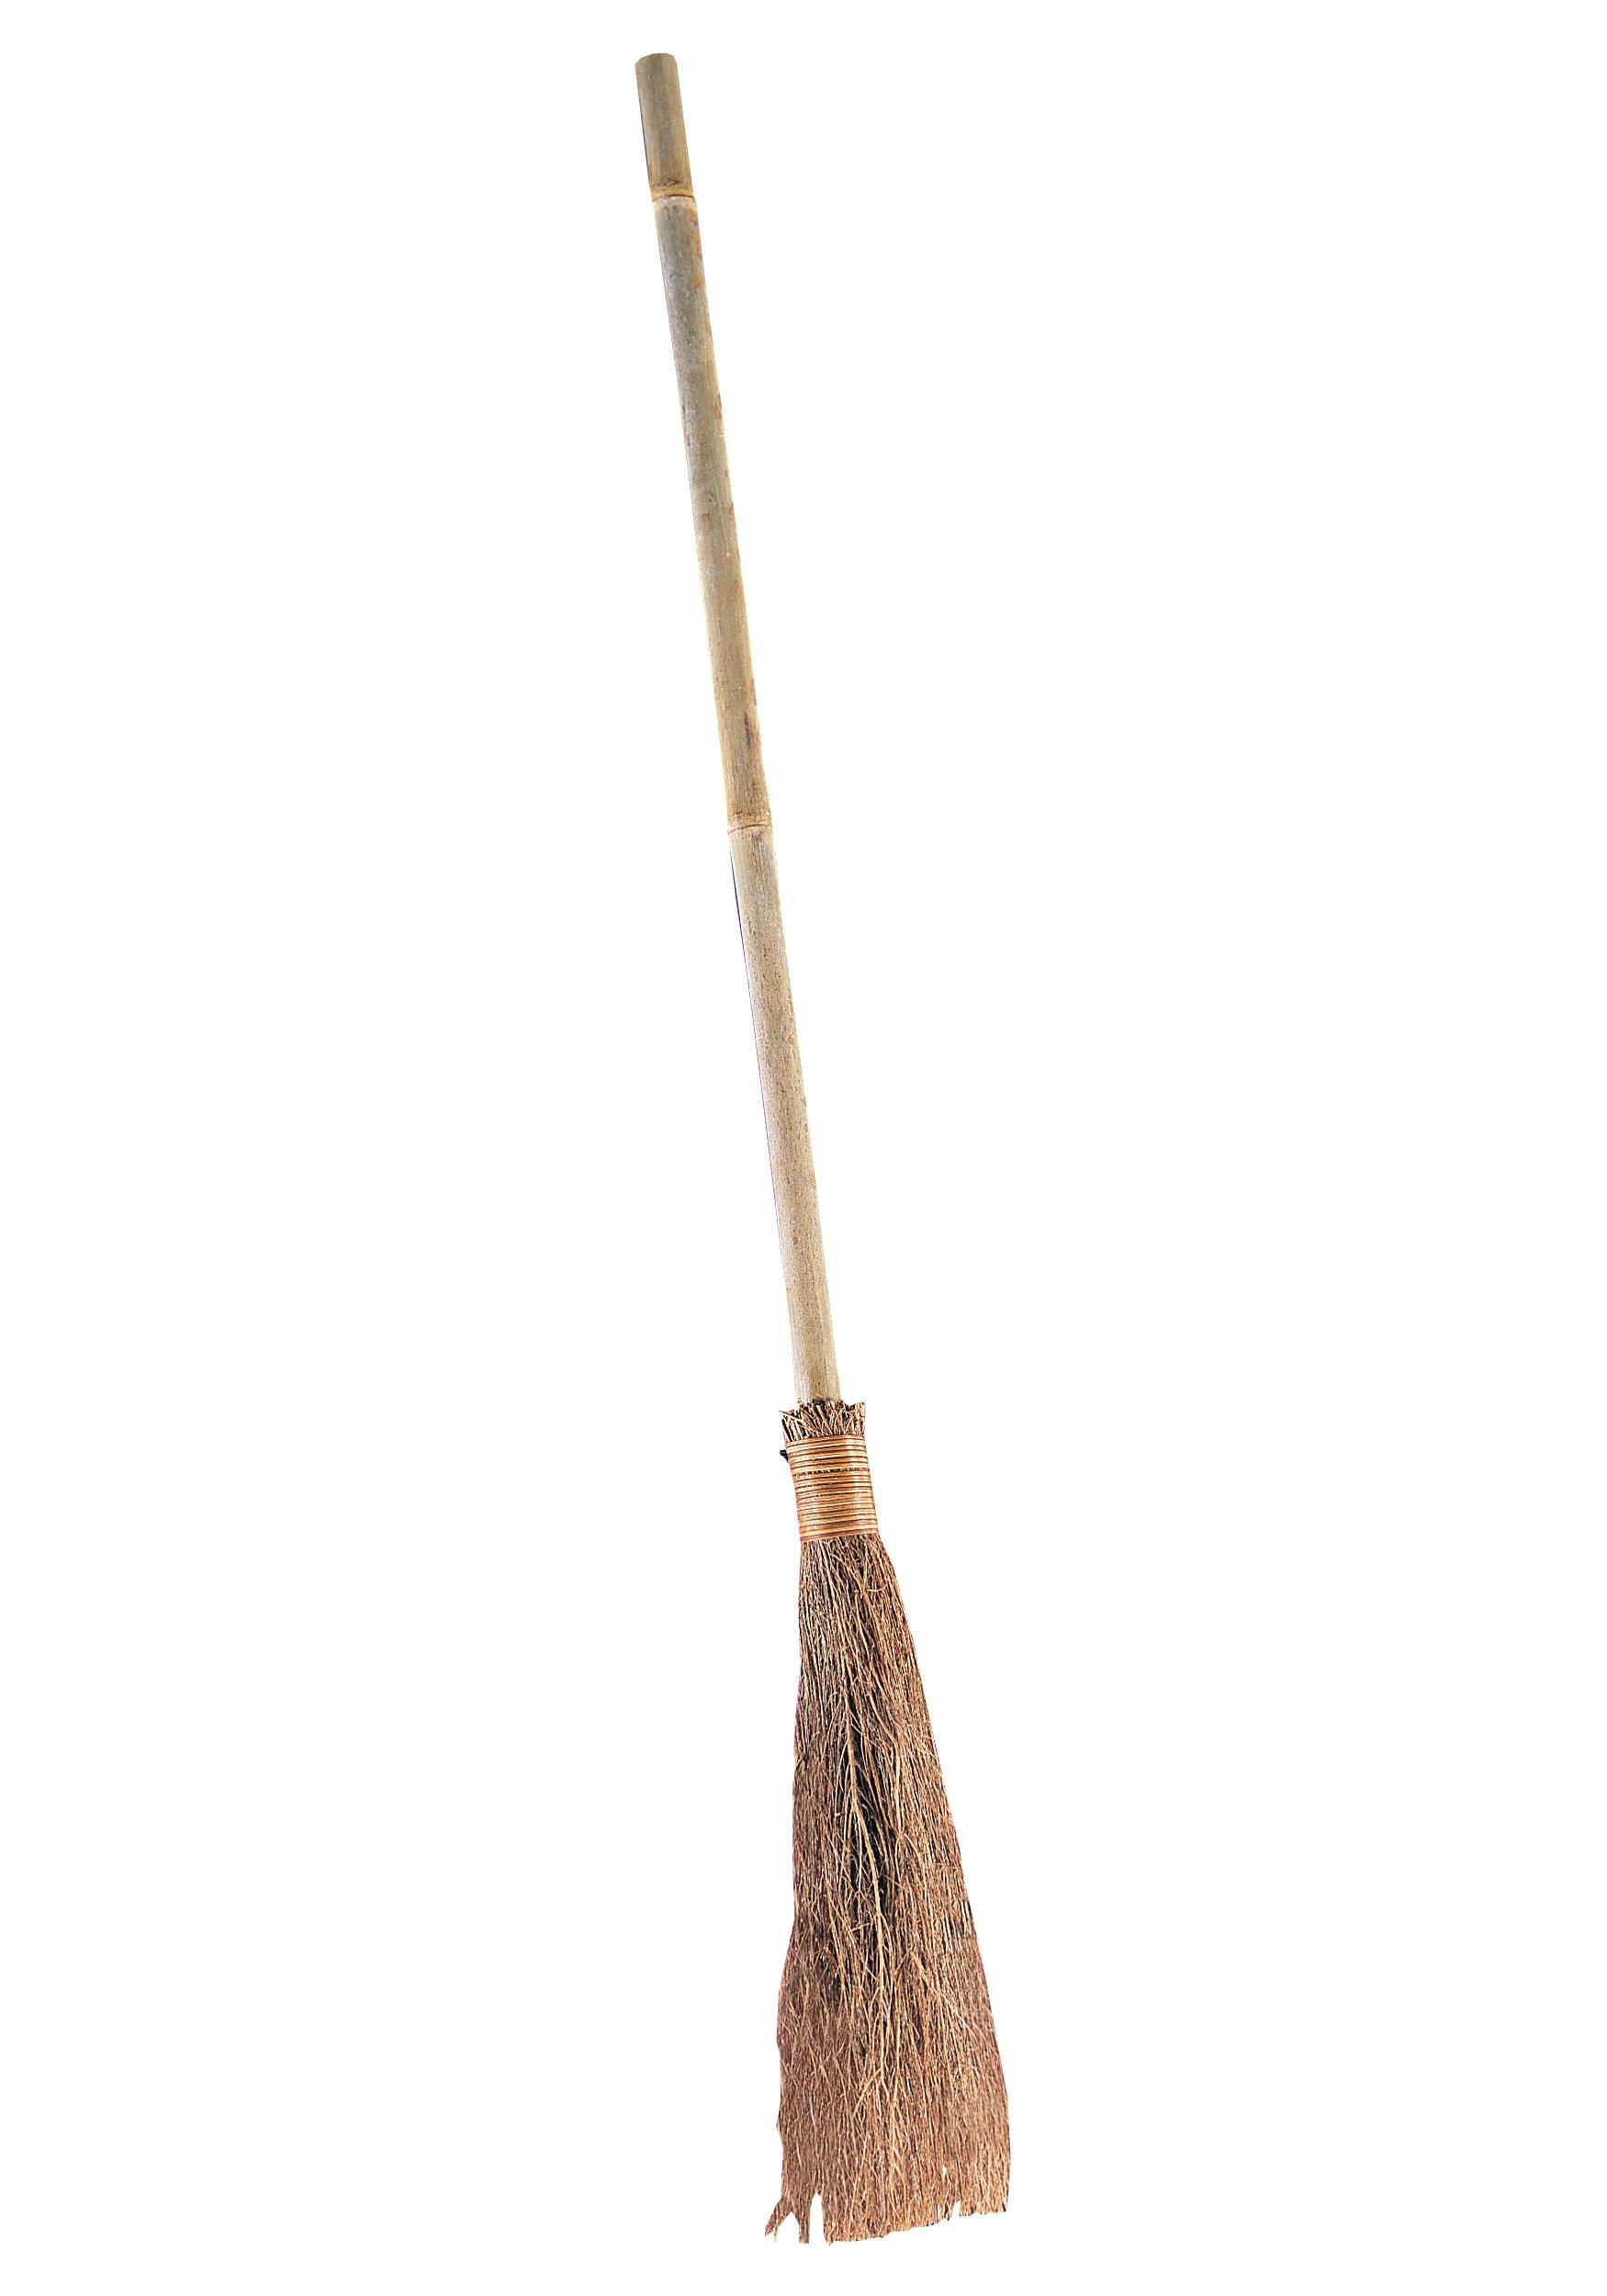 Witch broom￼